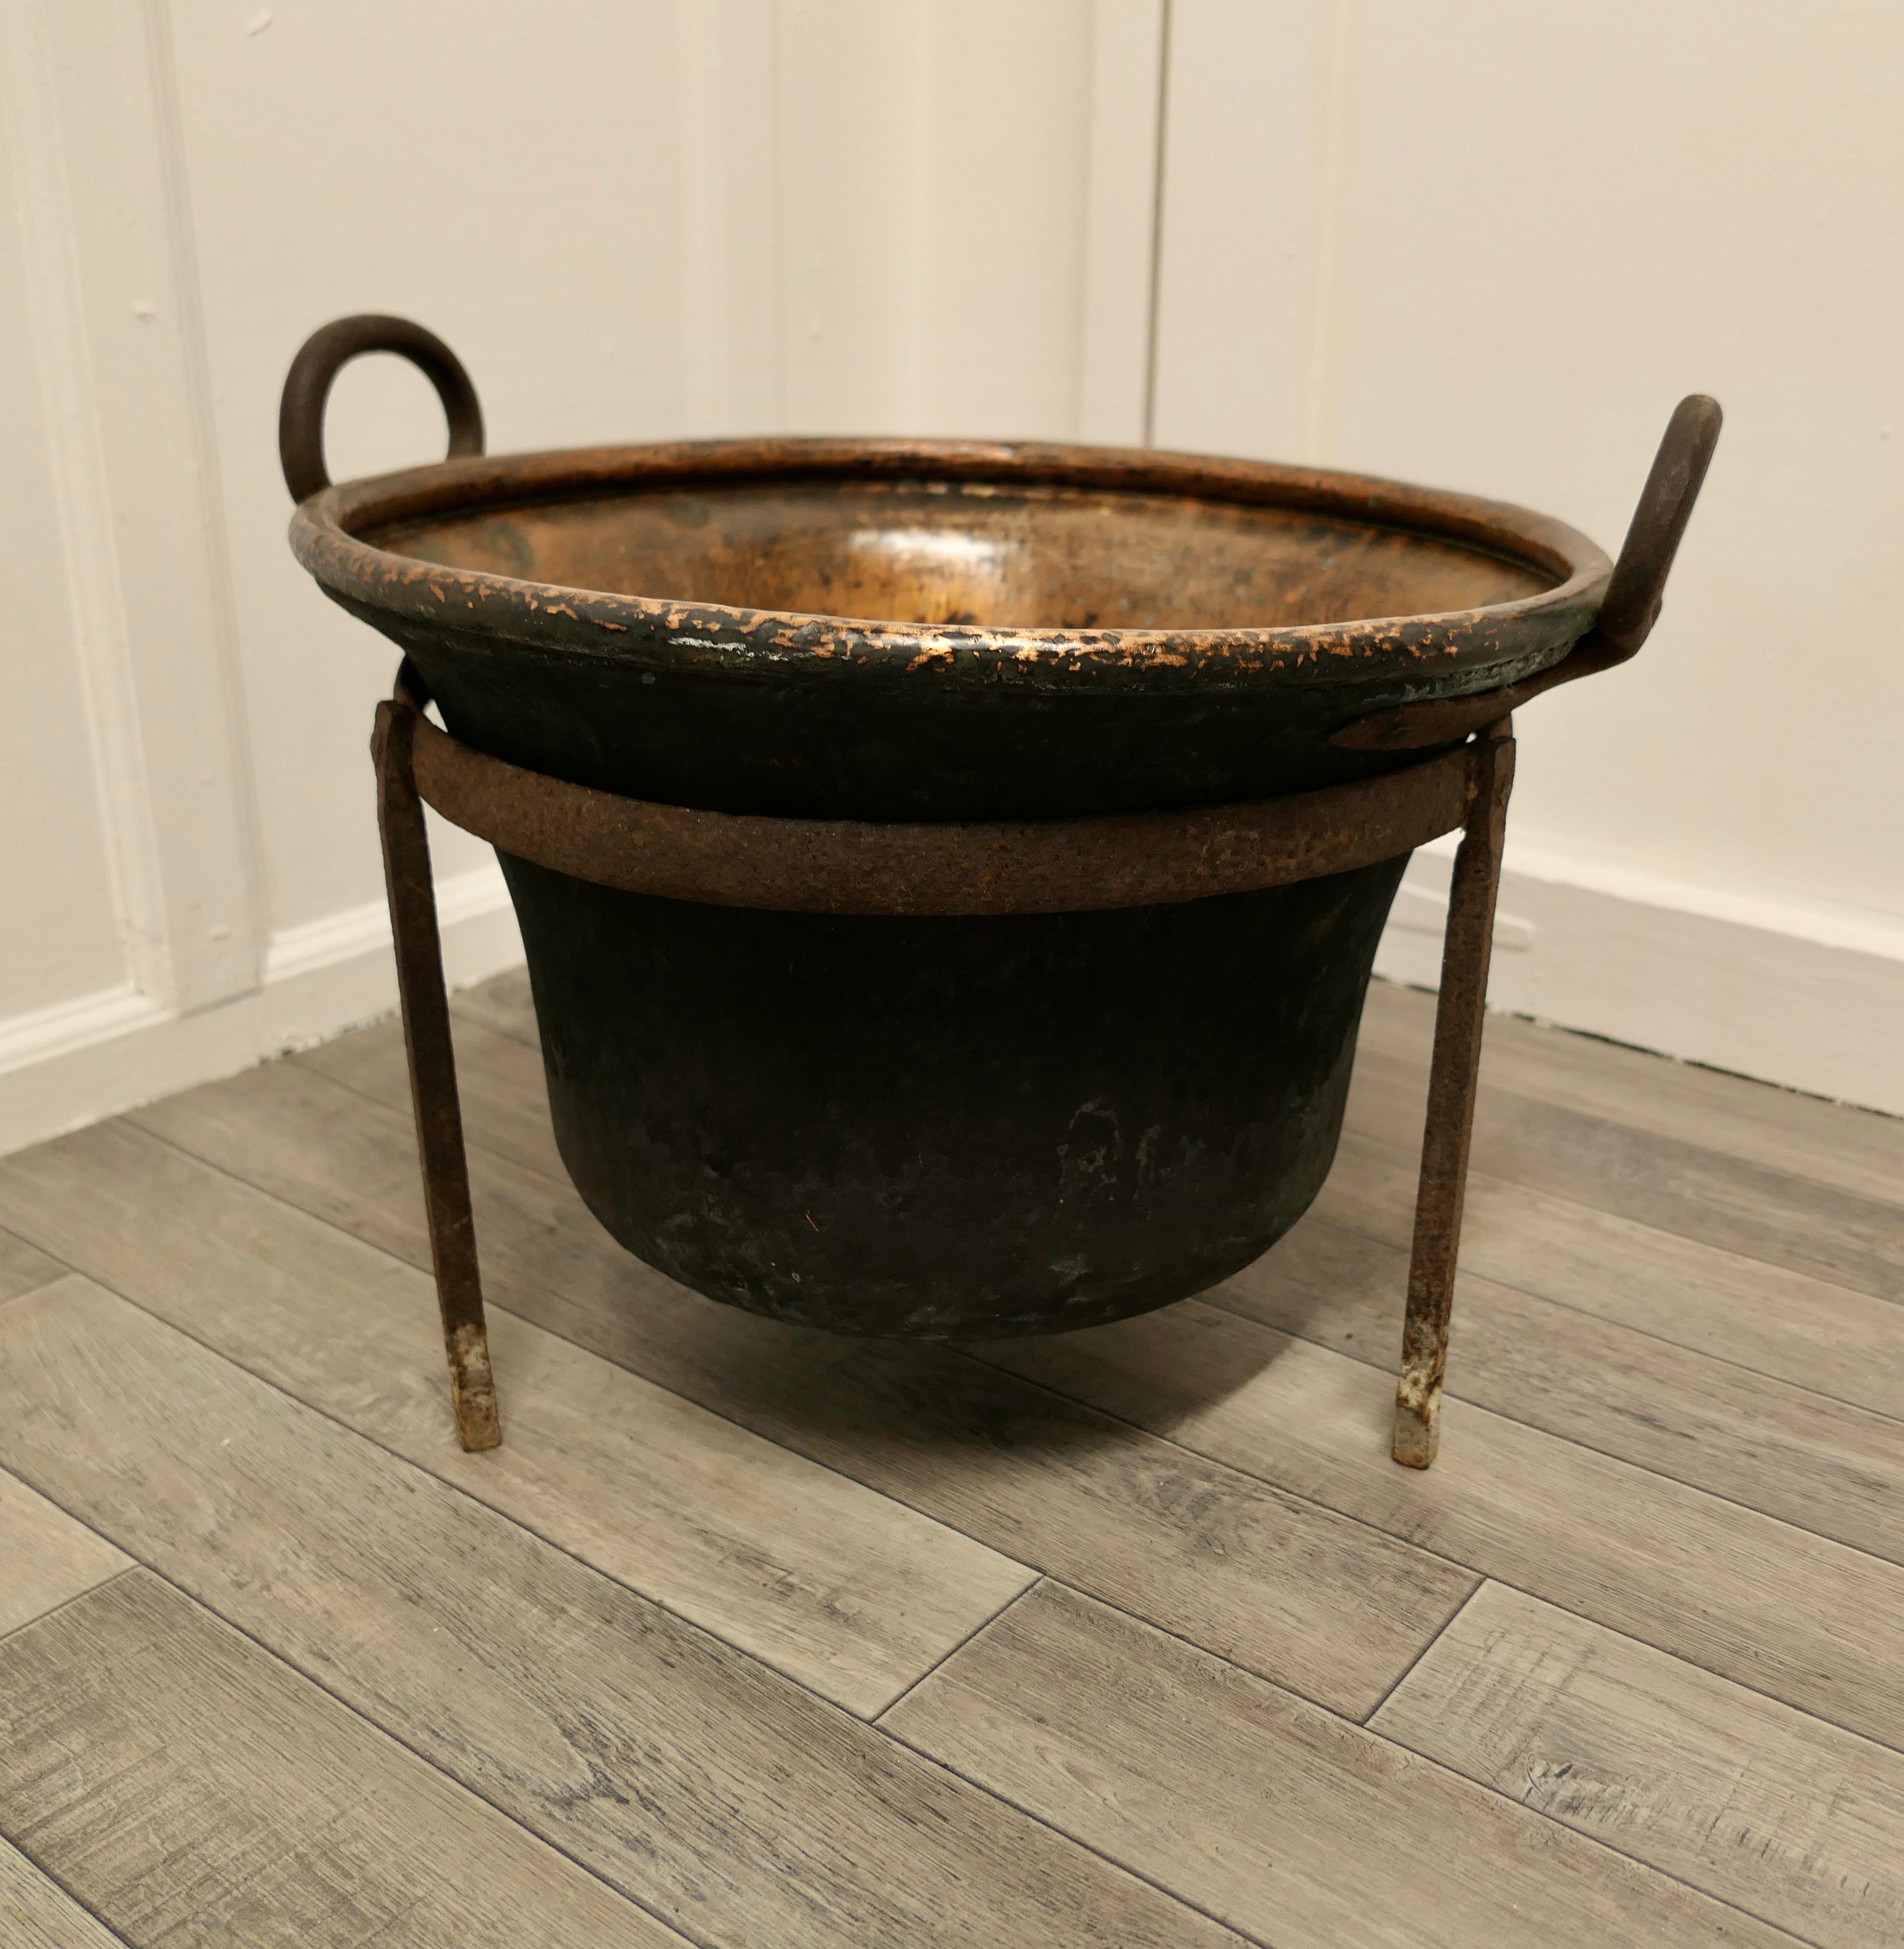 Hand beaten copper cooking cauldron on stand, log basket

This is a lovely early Cooking Pot, it is made in hand beaten copper, slightly flaring out at the top with a sturdy handle on each side
The pot has a rolled top edge, Iron handles and sits